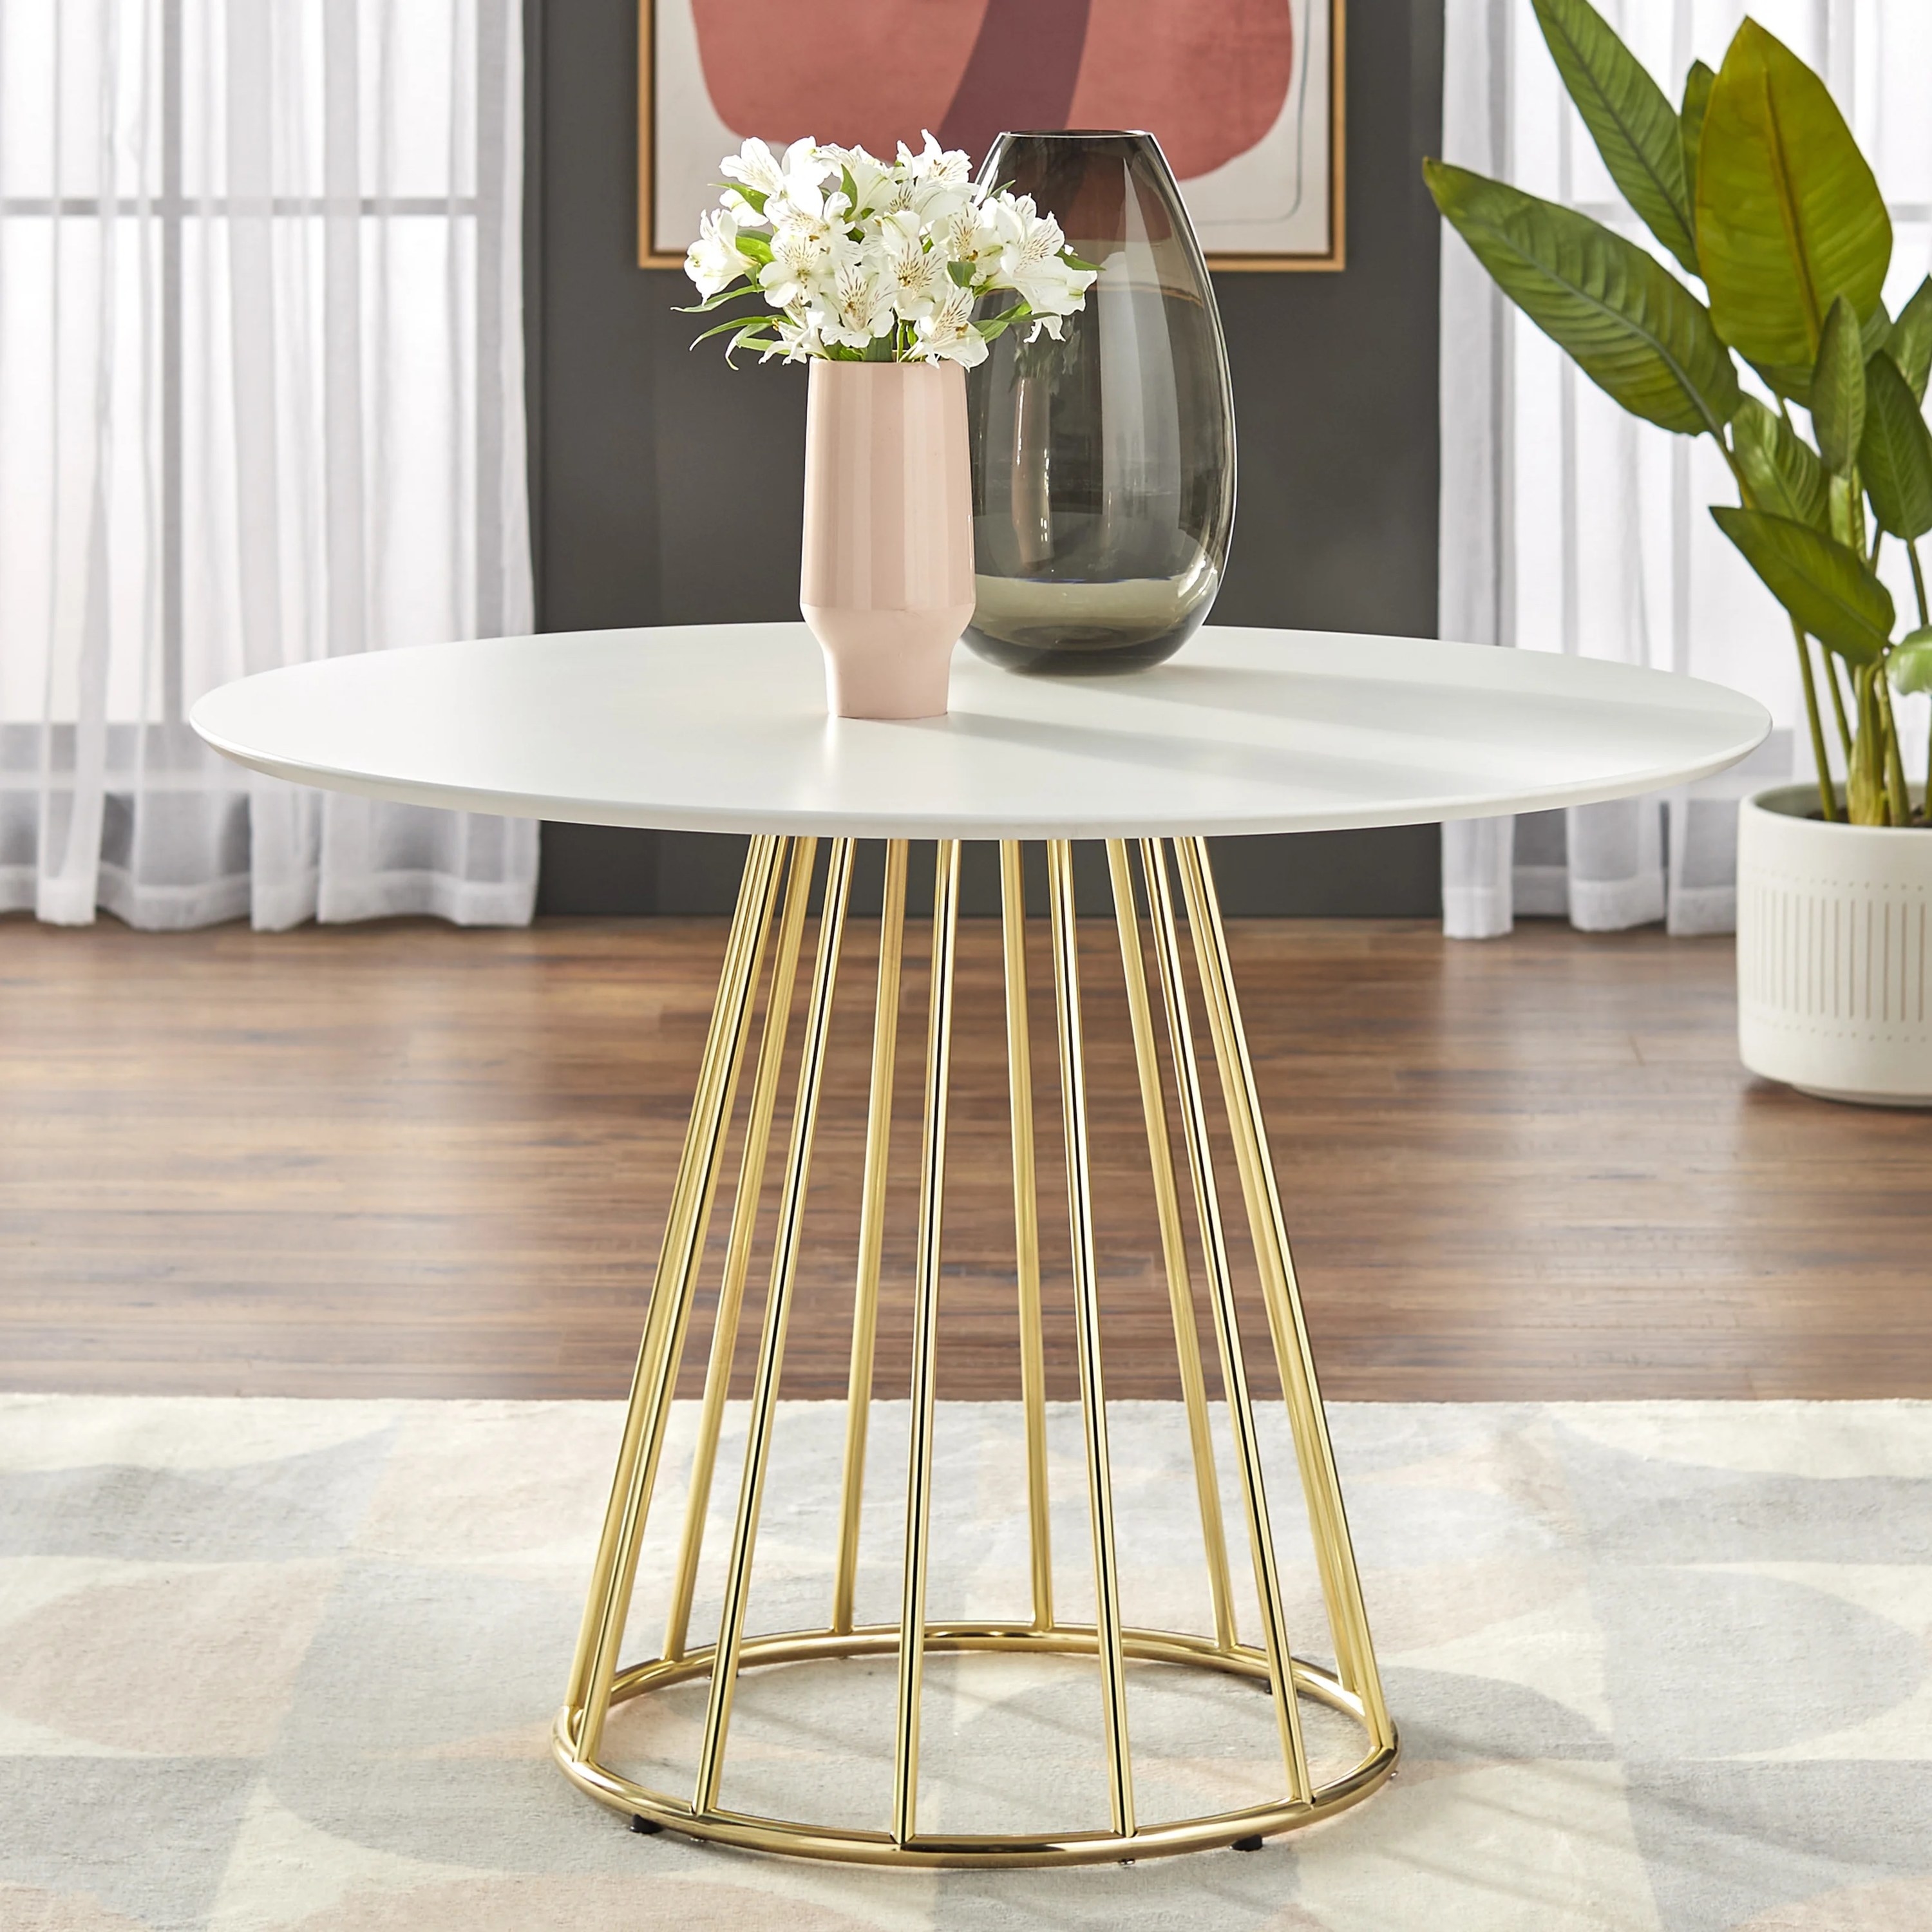 A pedestal dining table